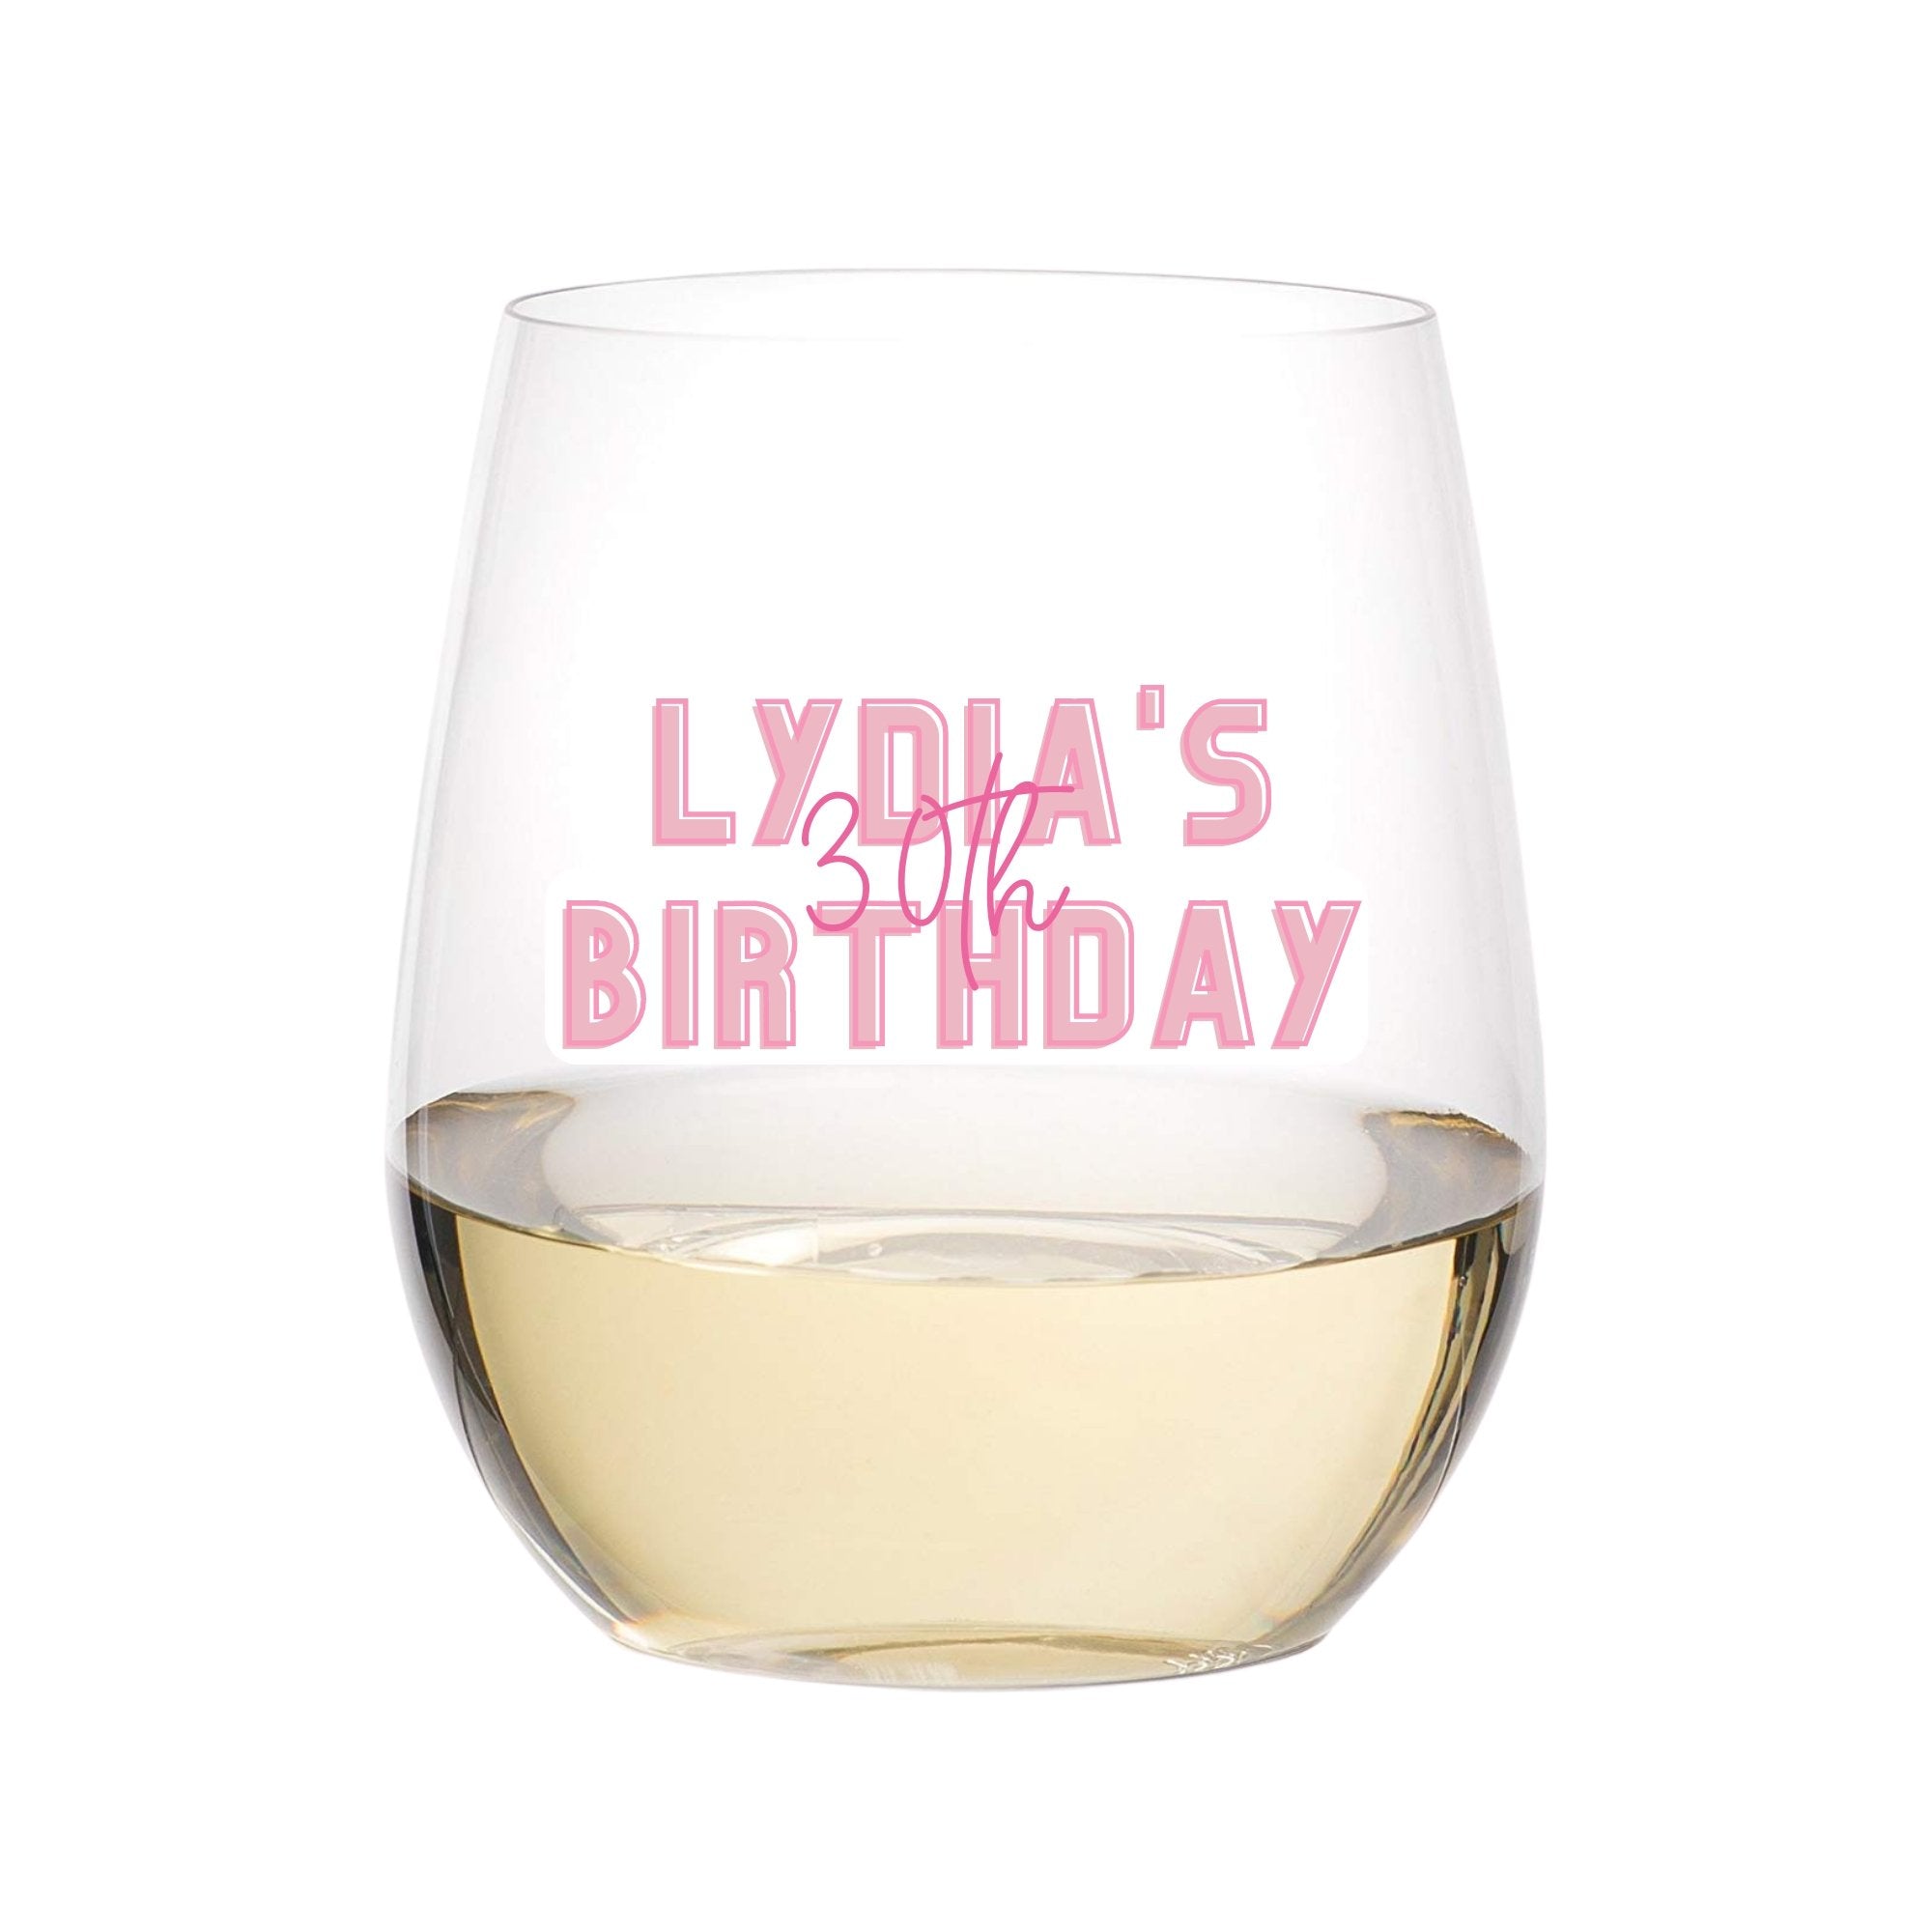 A wine glass is customized with a 30th birthday design.